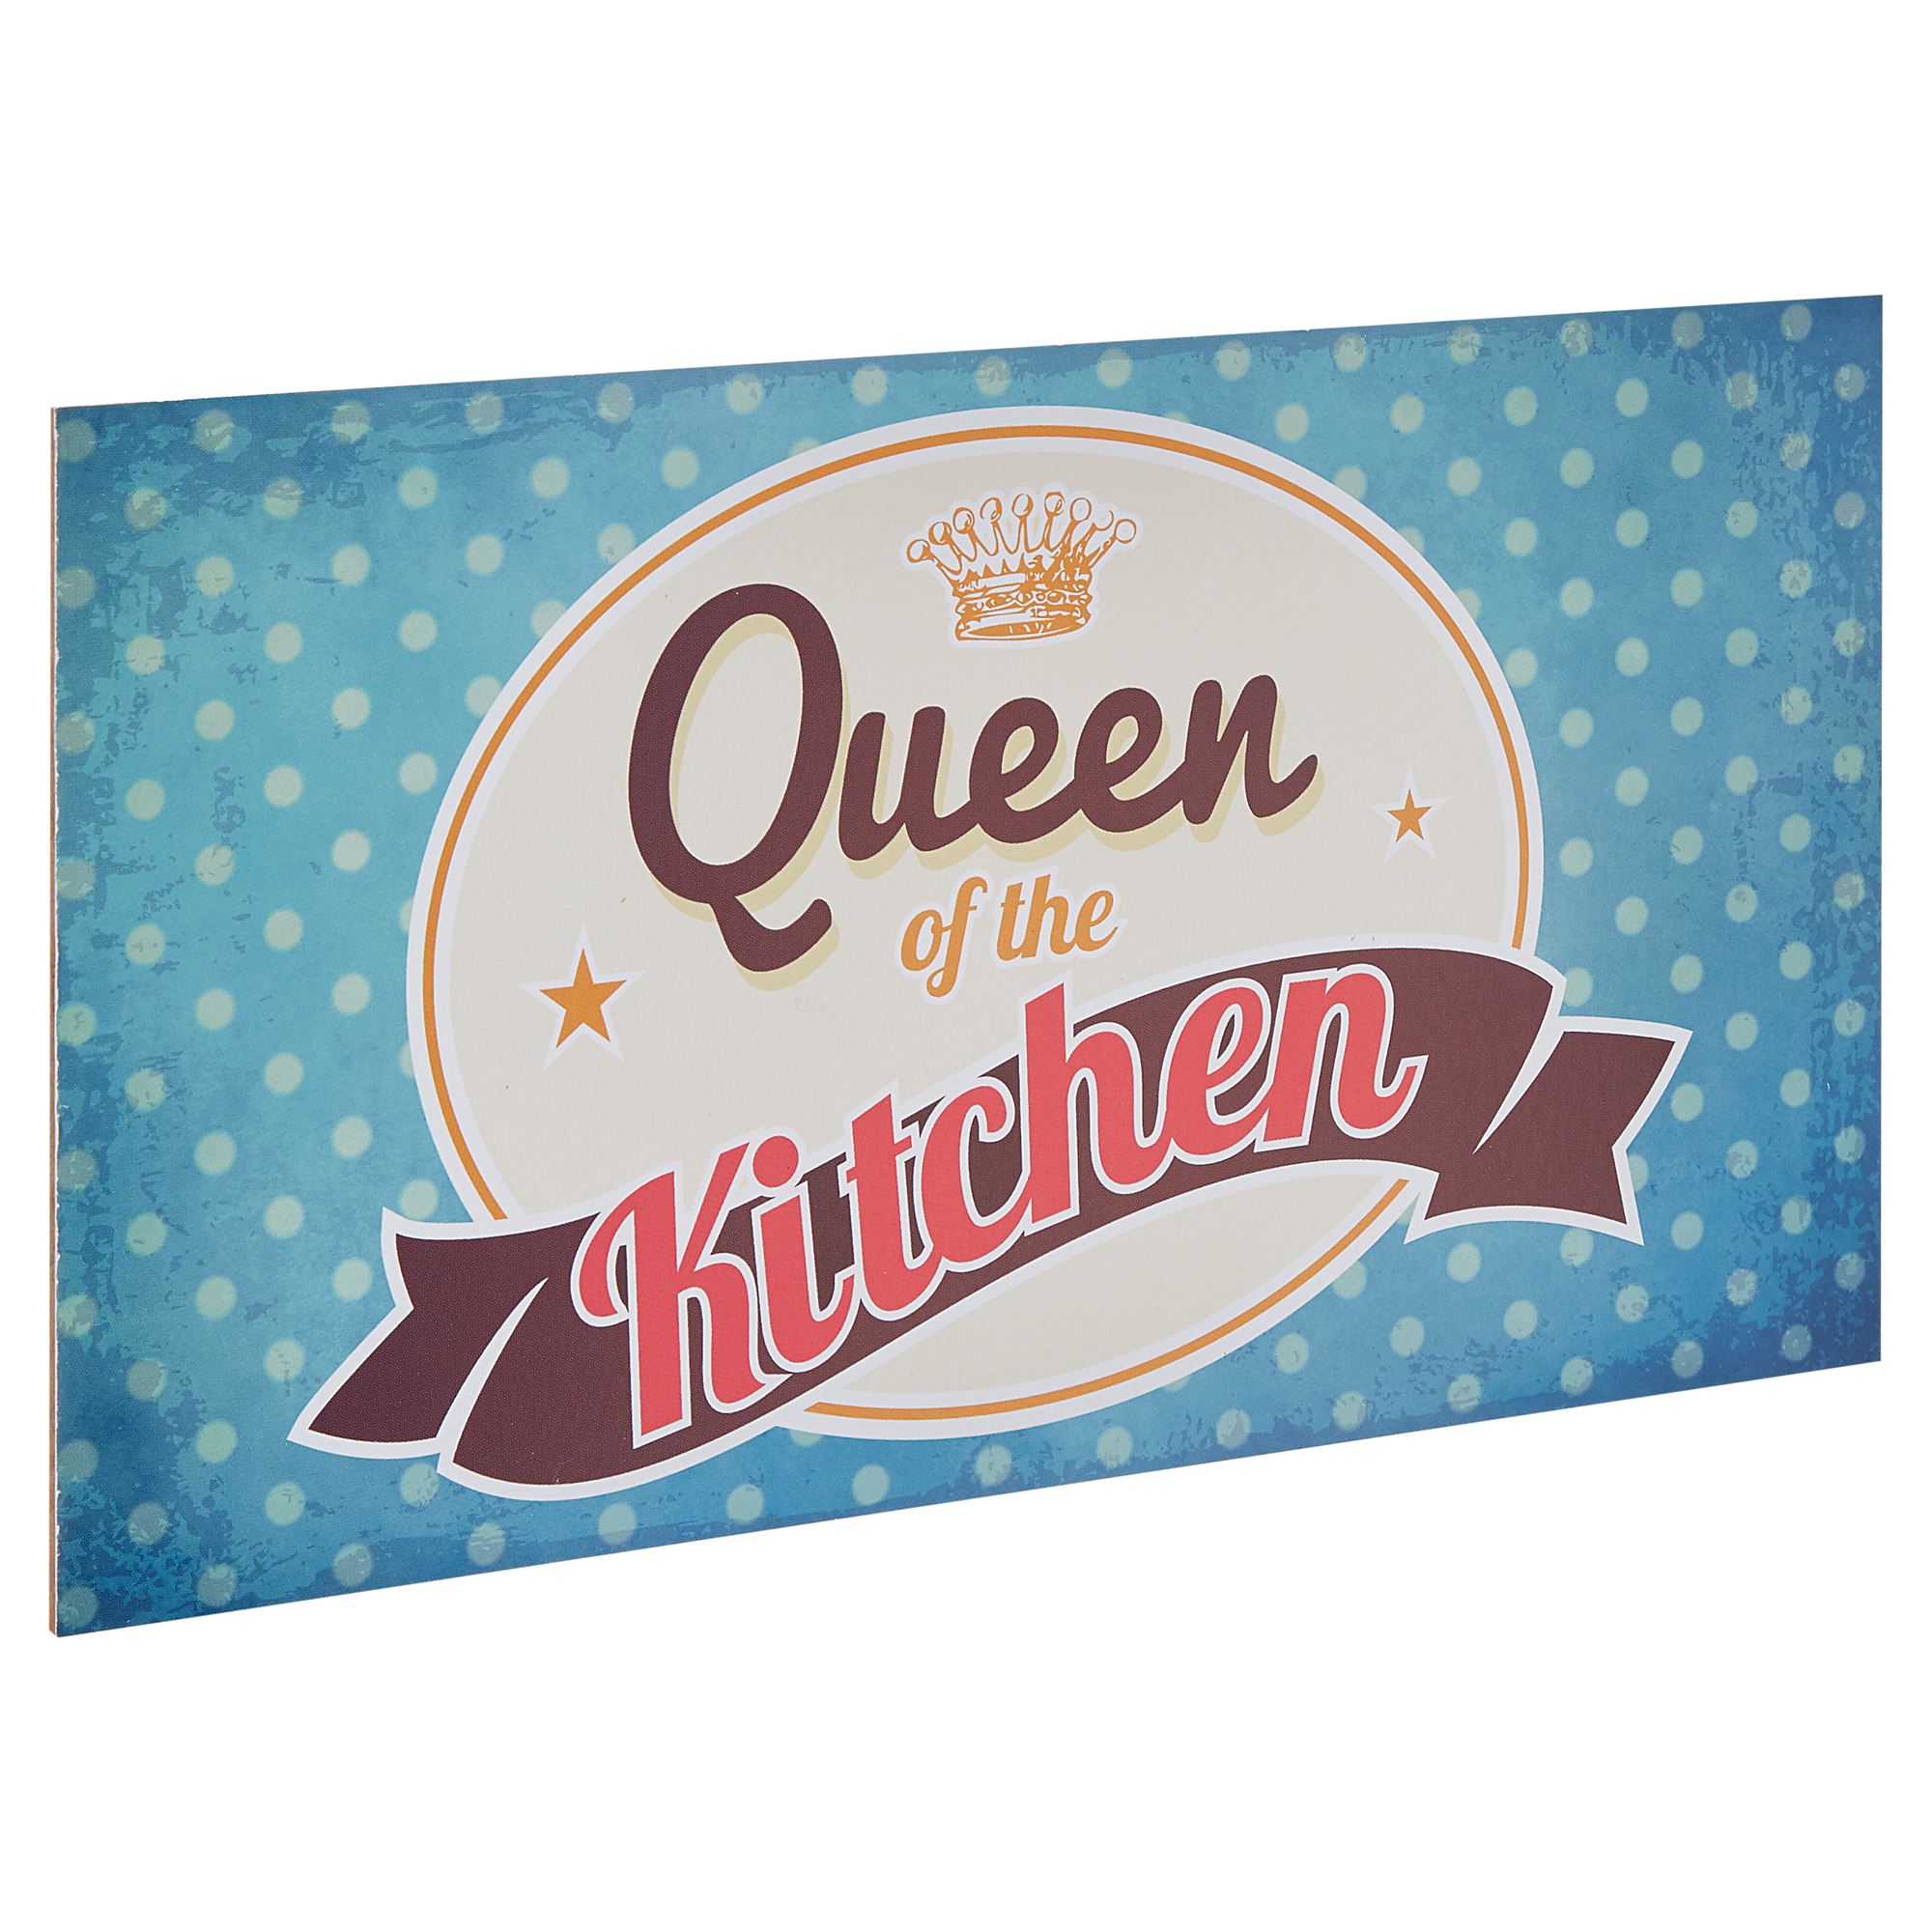 Decopanel "Queen of the Kitchen" 27 x 15 cm + product picture